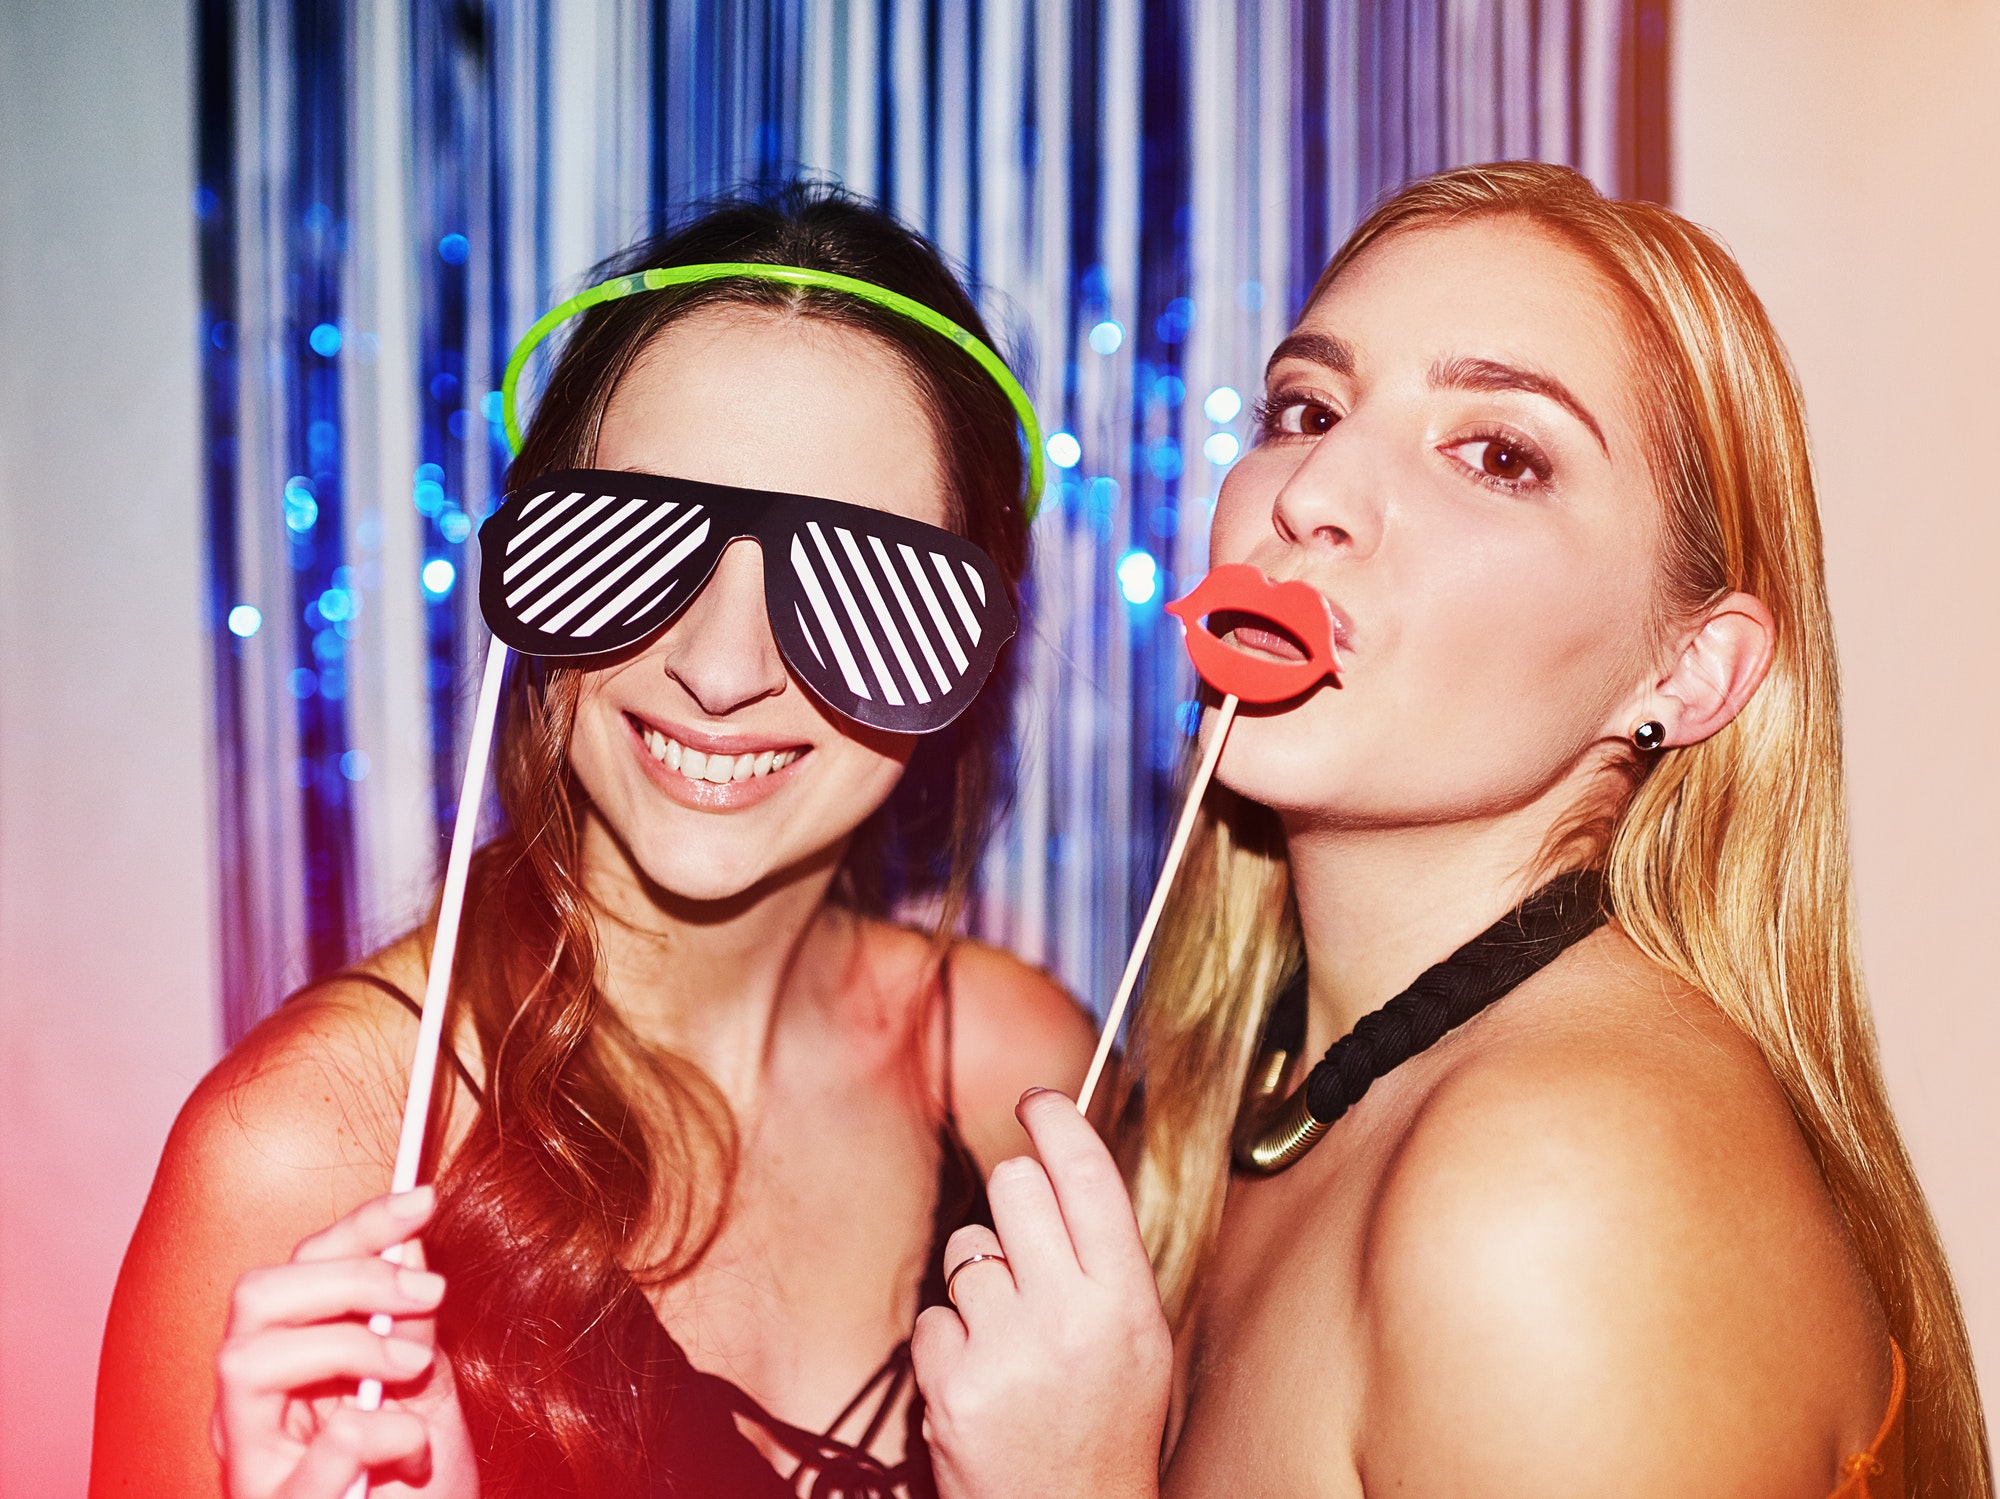 TGIF. Shot of two beautiful young women having fun with props in a photobooth.